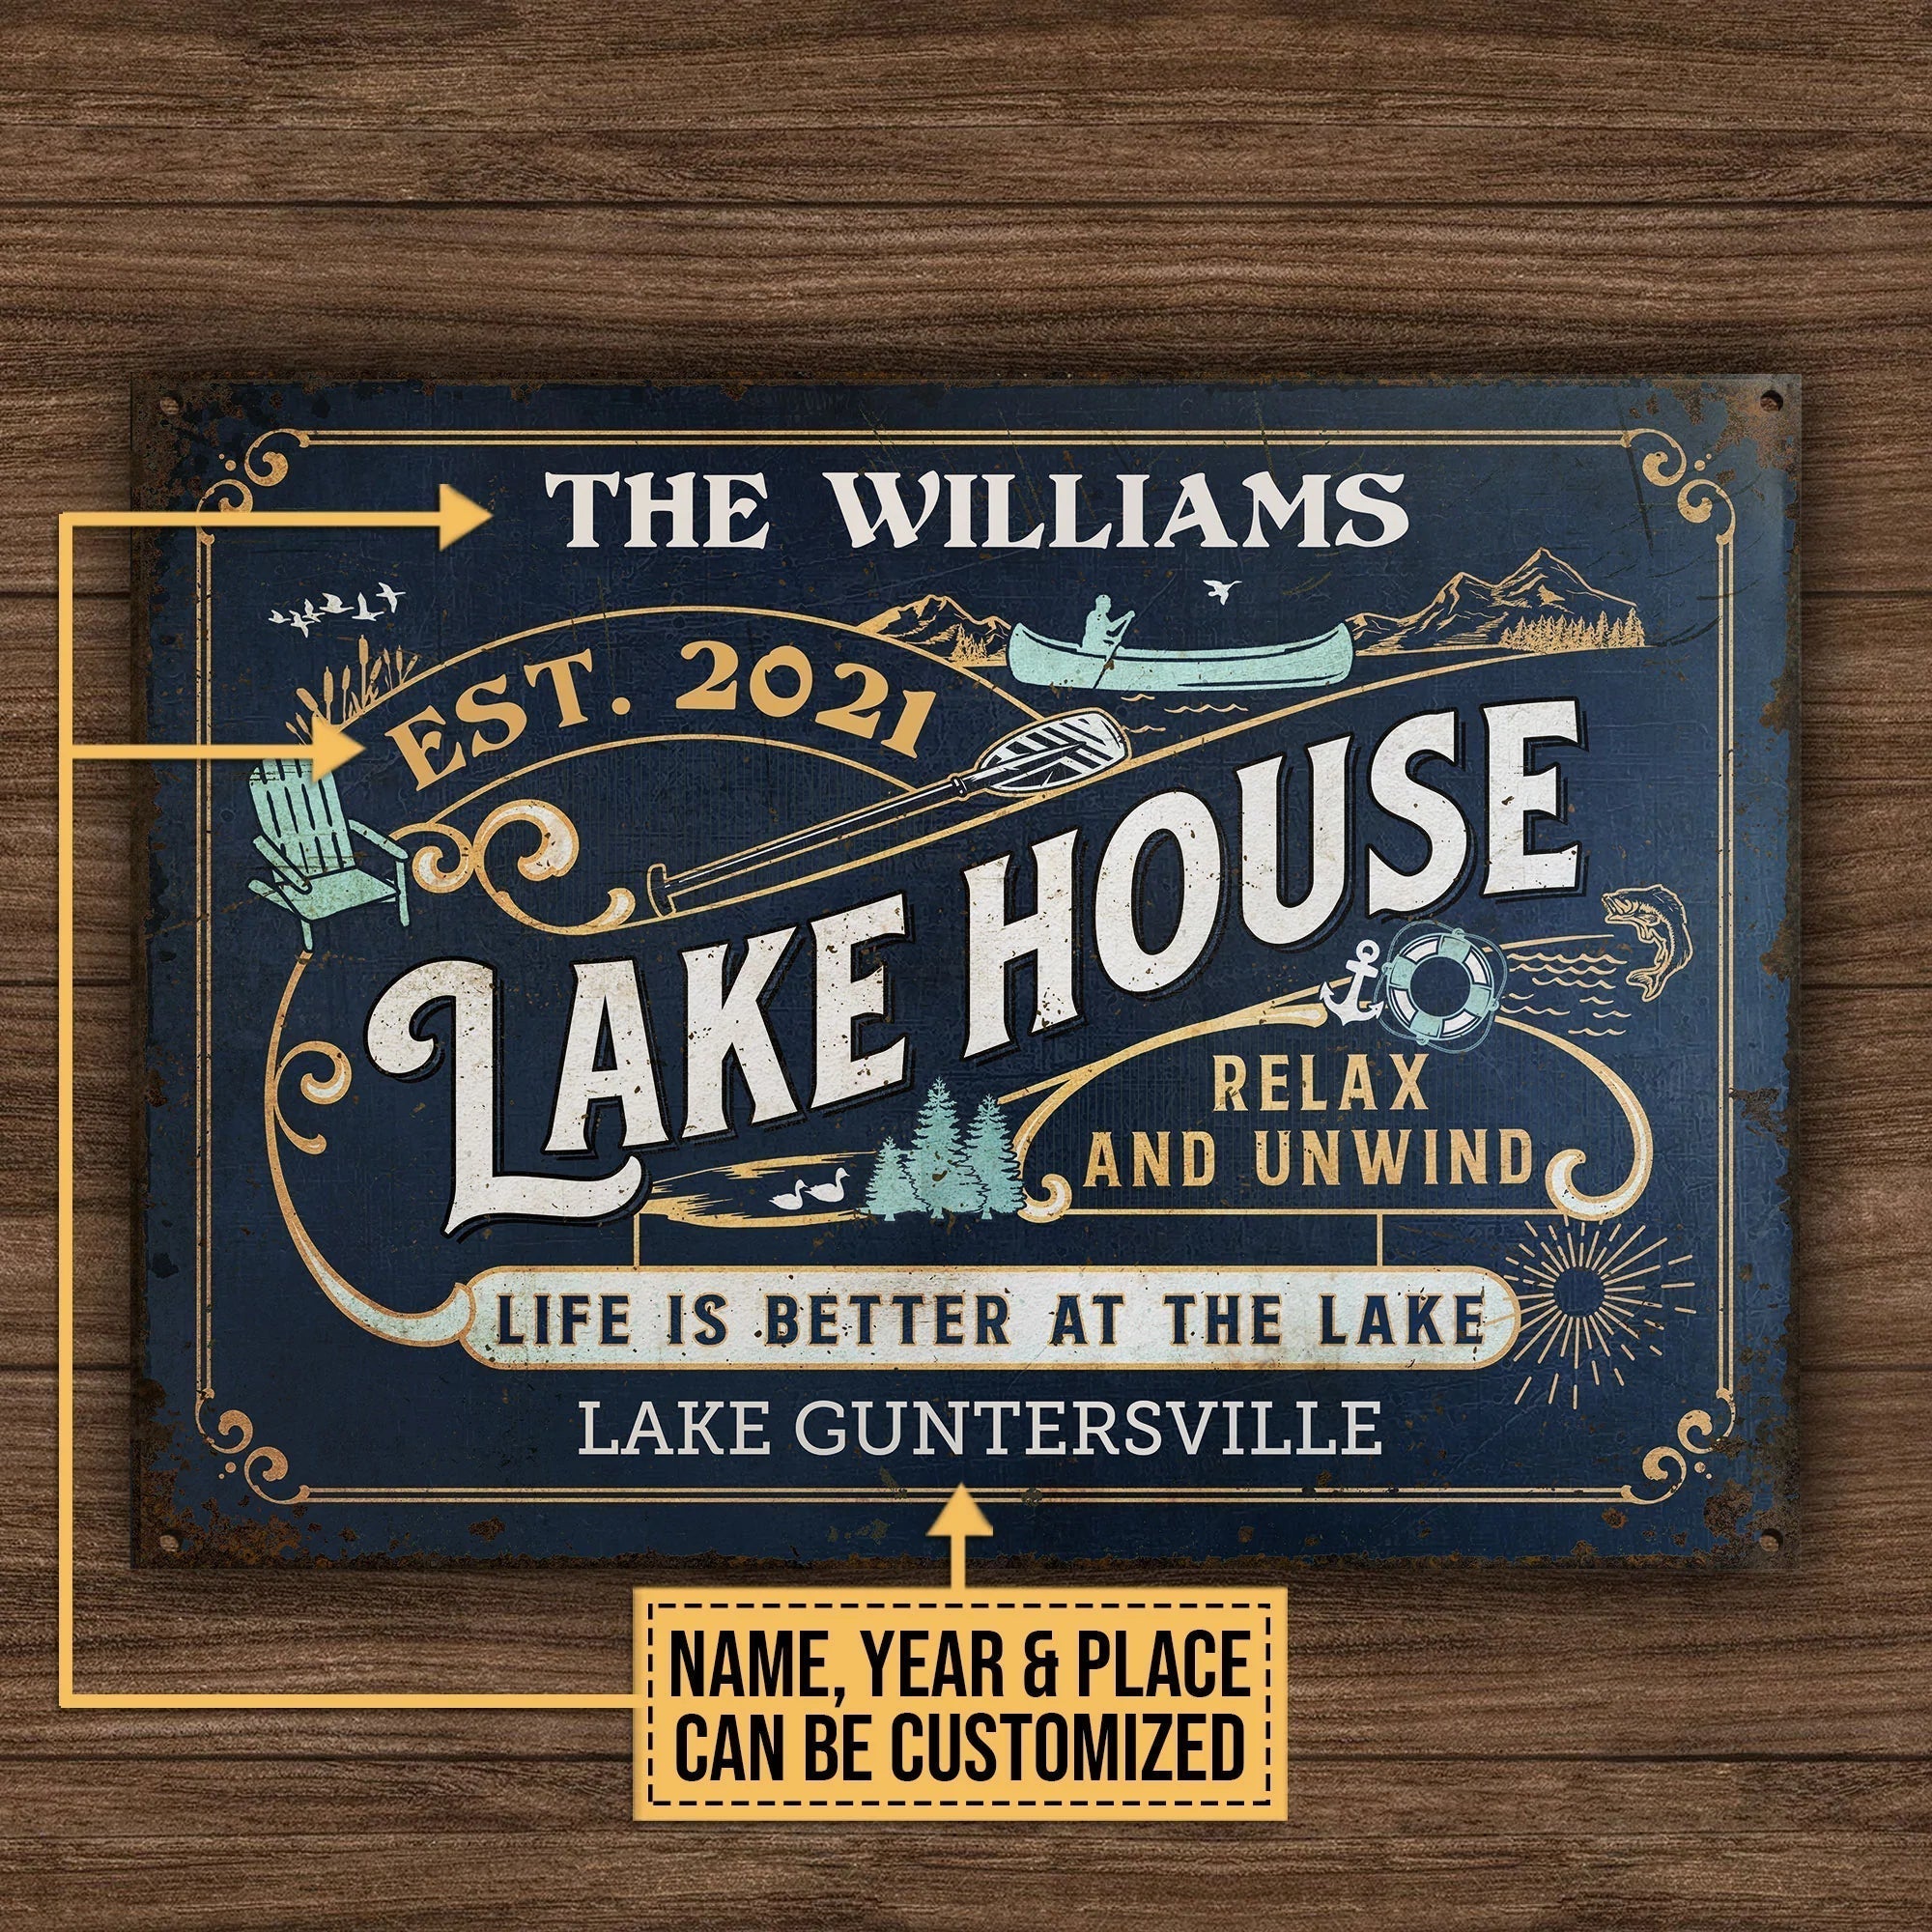 Personalized Metal Sign Lake House Life Better CTM00 One Size 24x18 inch (60.96x45.72 cm) Custom - Printyourwear